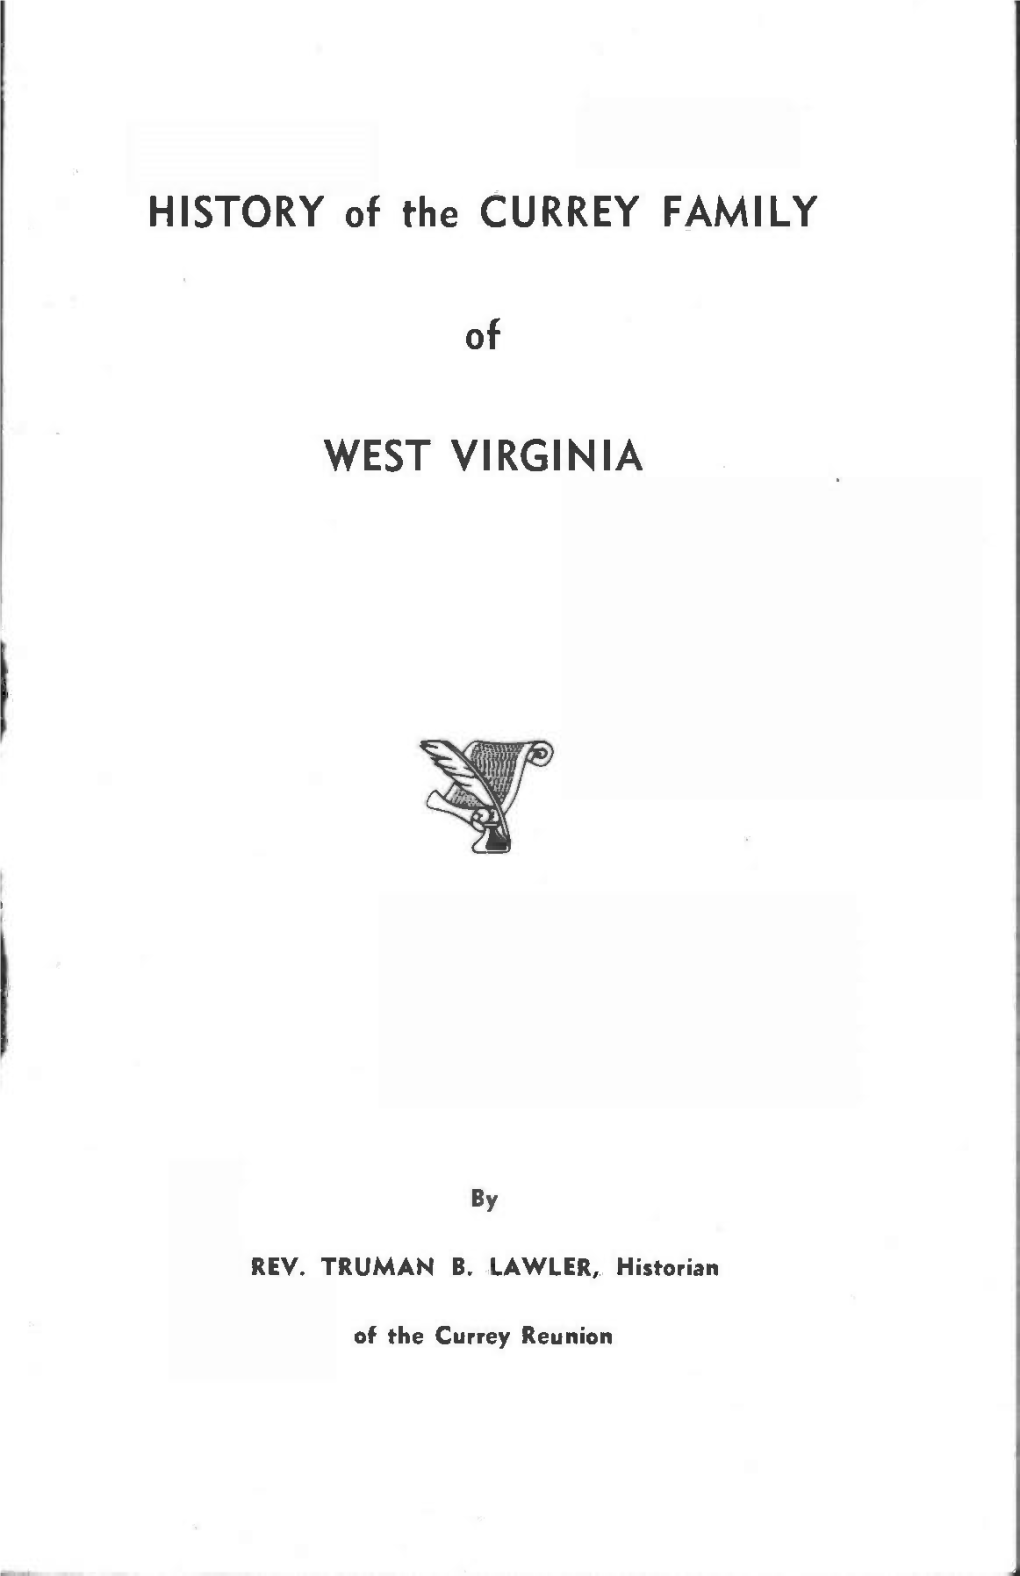 History of the Currey Family of West Virginia